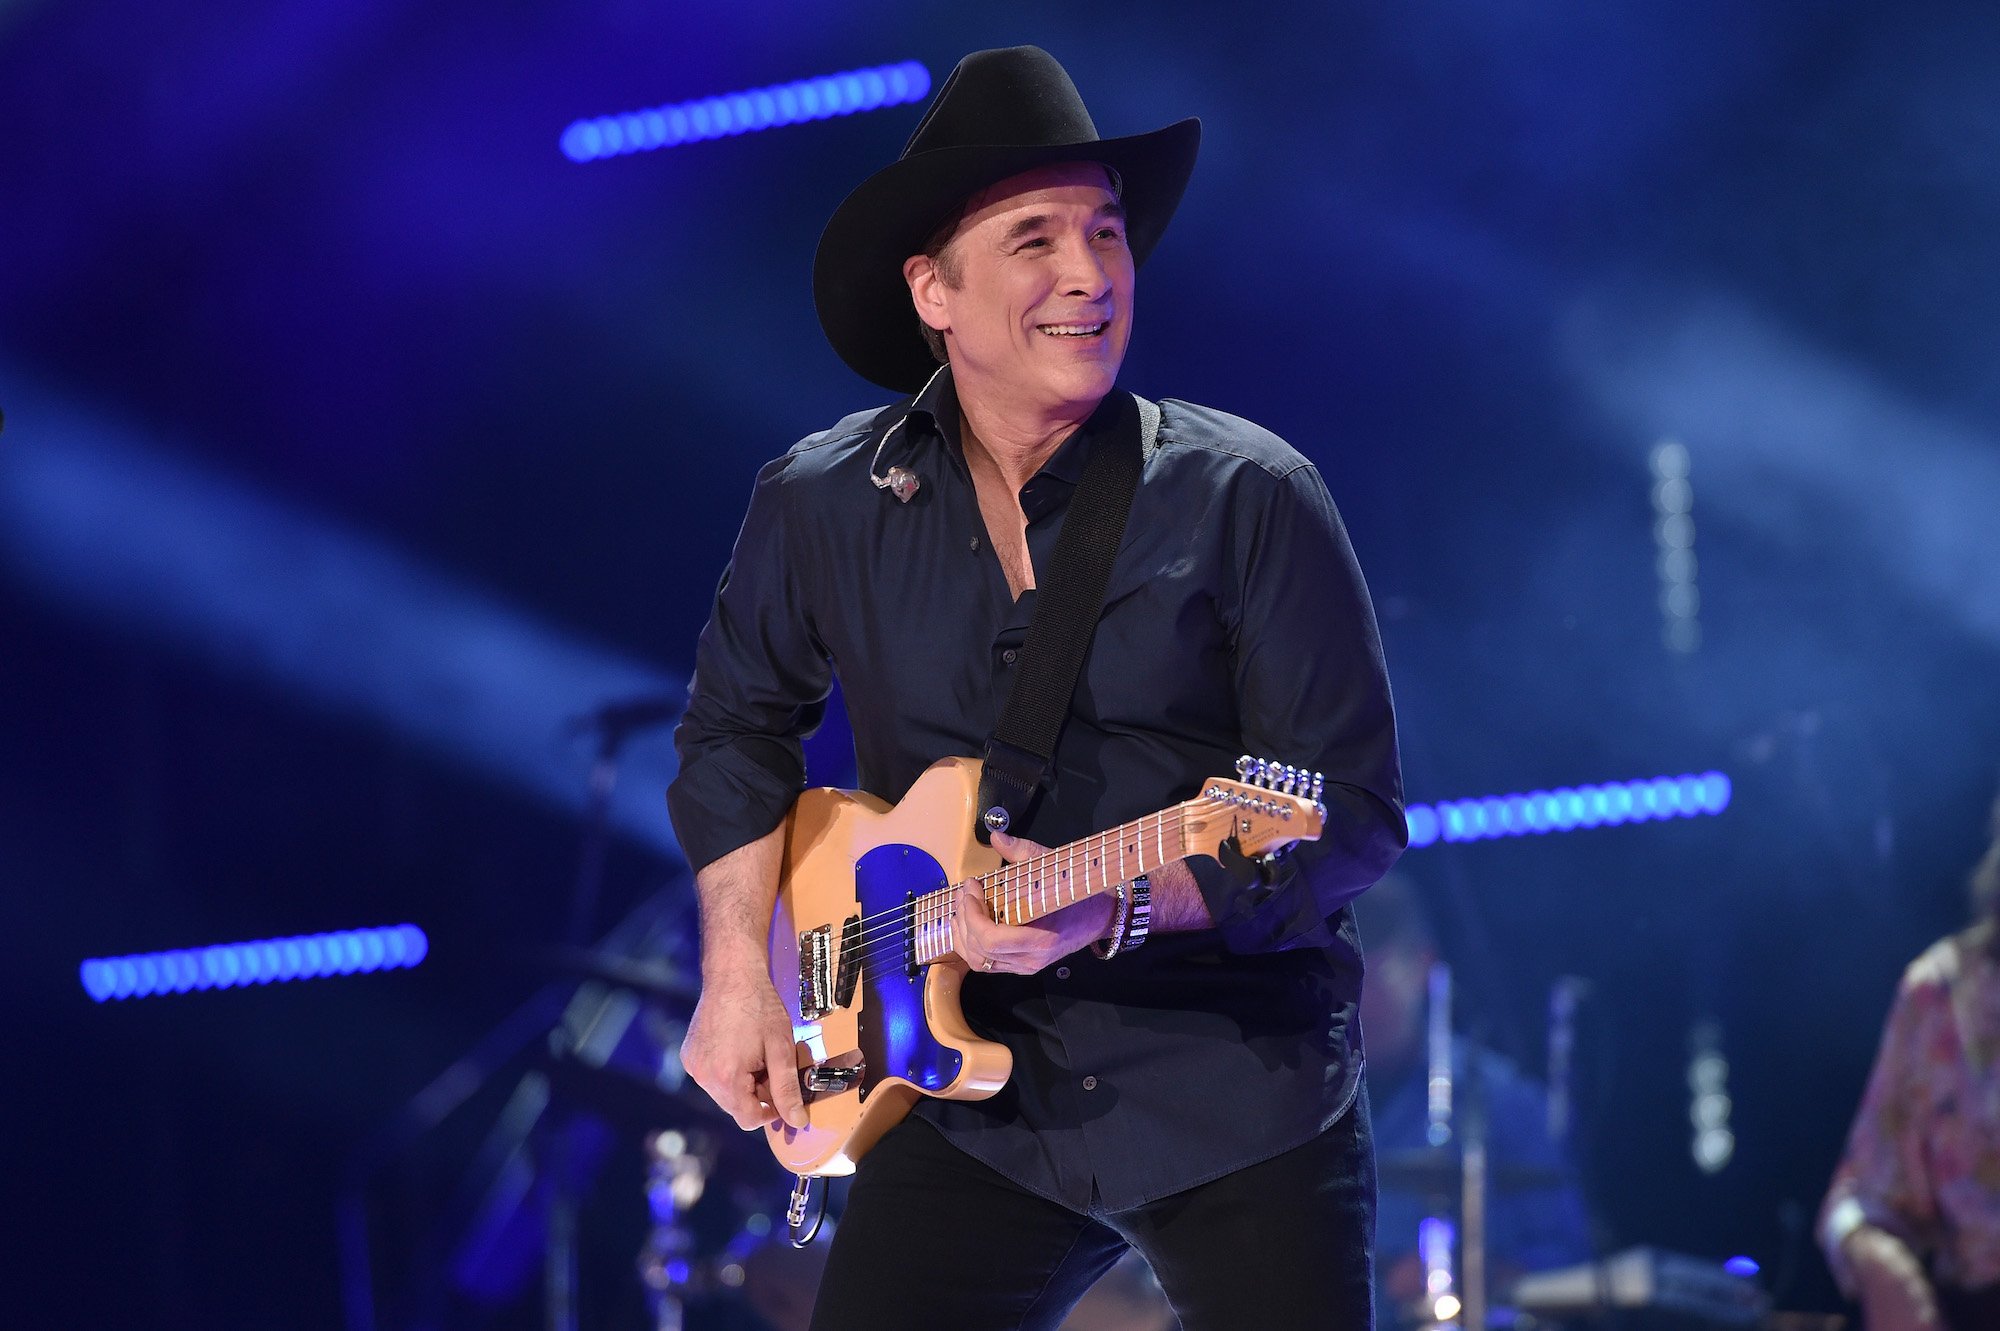 Clint Black smiling, holding a guitar on stage